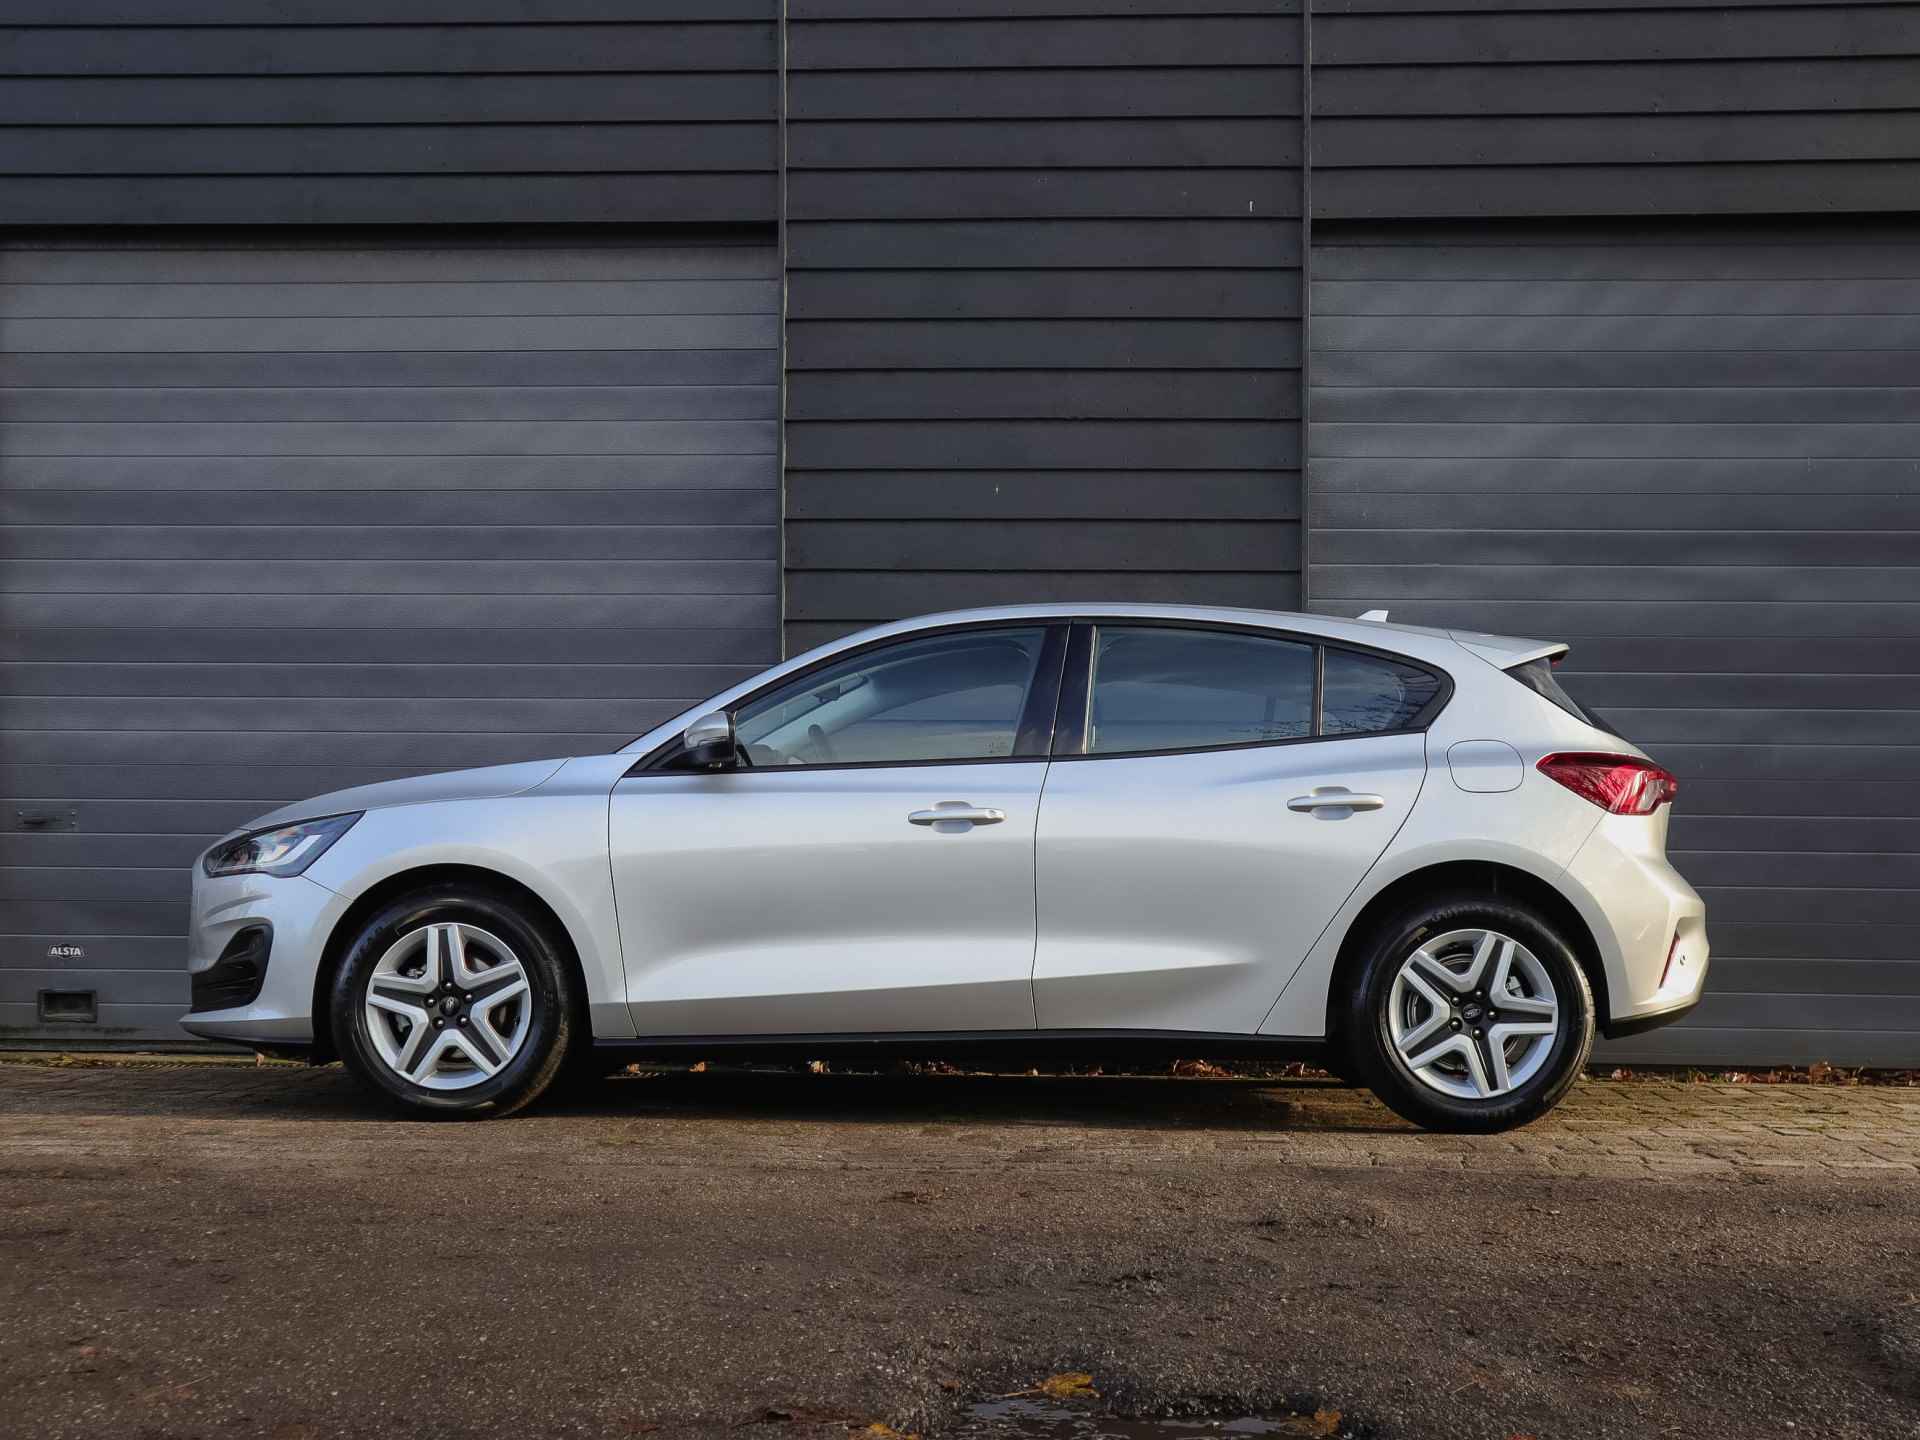 Ford Focus 1.0i Hybrid Connected, (149PK) 1e-Eig, Ford-Dealer-Onderh, 12-Mnd-BOVAG, NL-Auto, Navigatie/Apple-Carplay/Android-Auto, Parkeersensoren-V+A, Cruise-Control, Airco, DAB, Lane-Assist, Privacy-Glas, Sportstoelen, Led-Koplampen, Adaptieve-Cruise-Control - 13/55